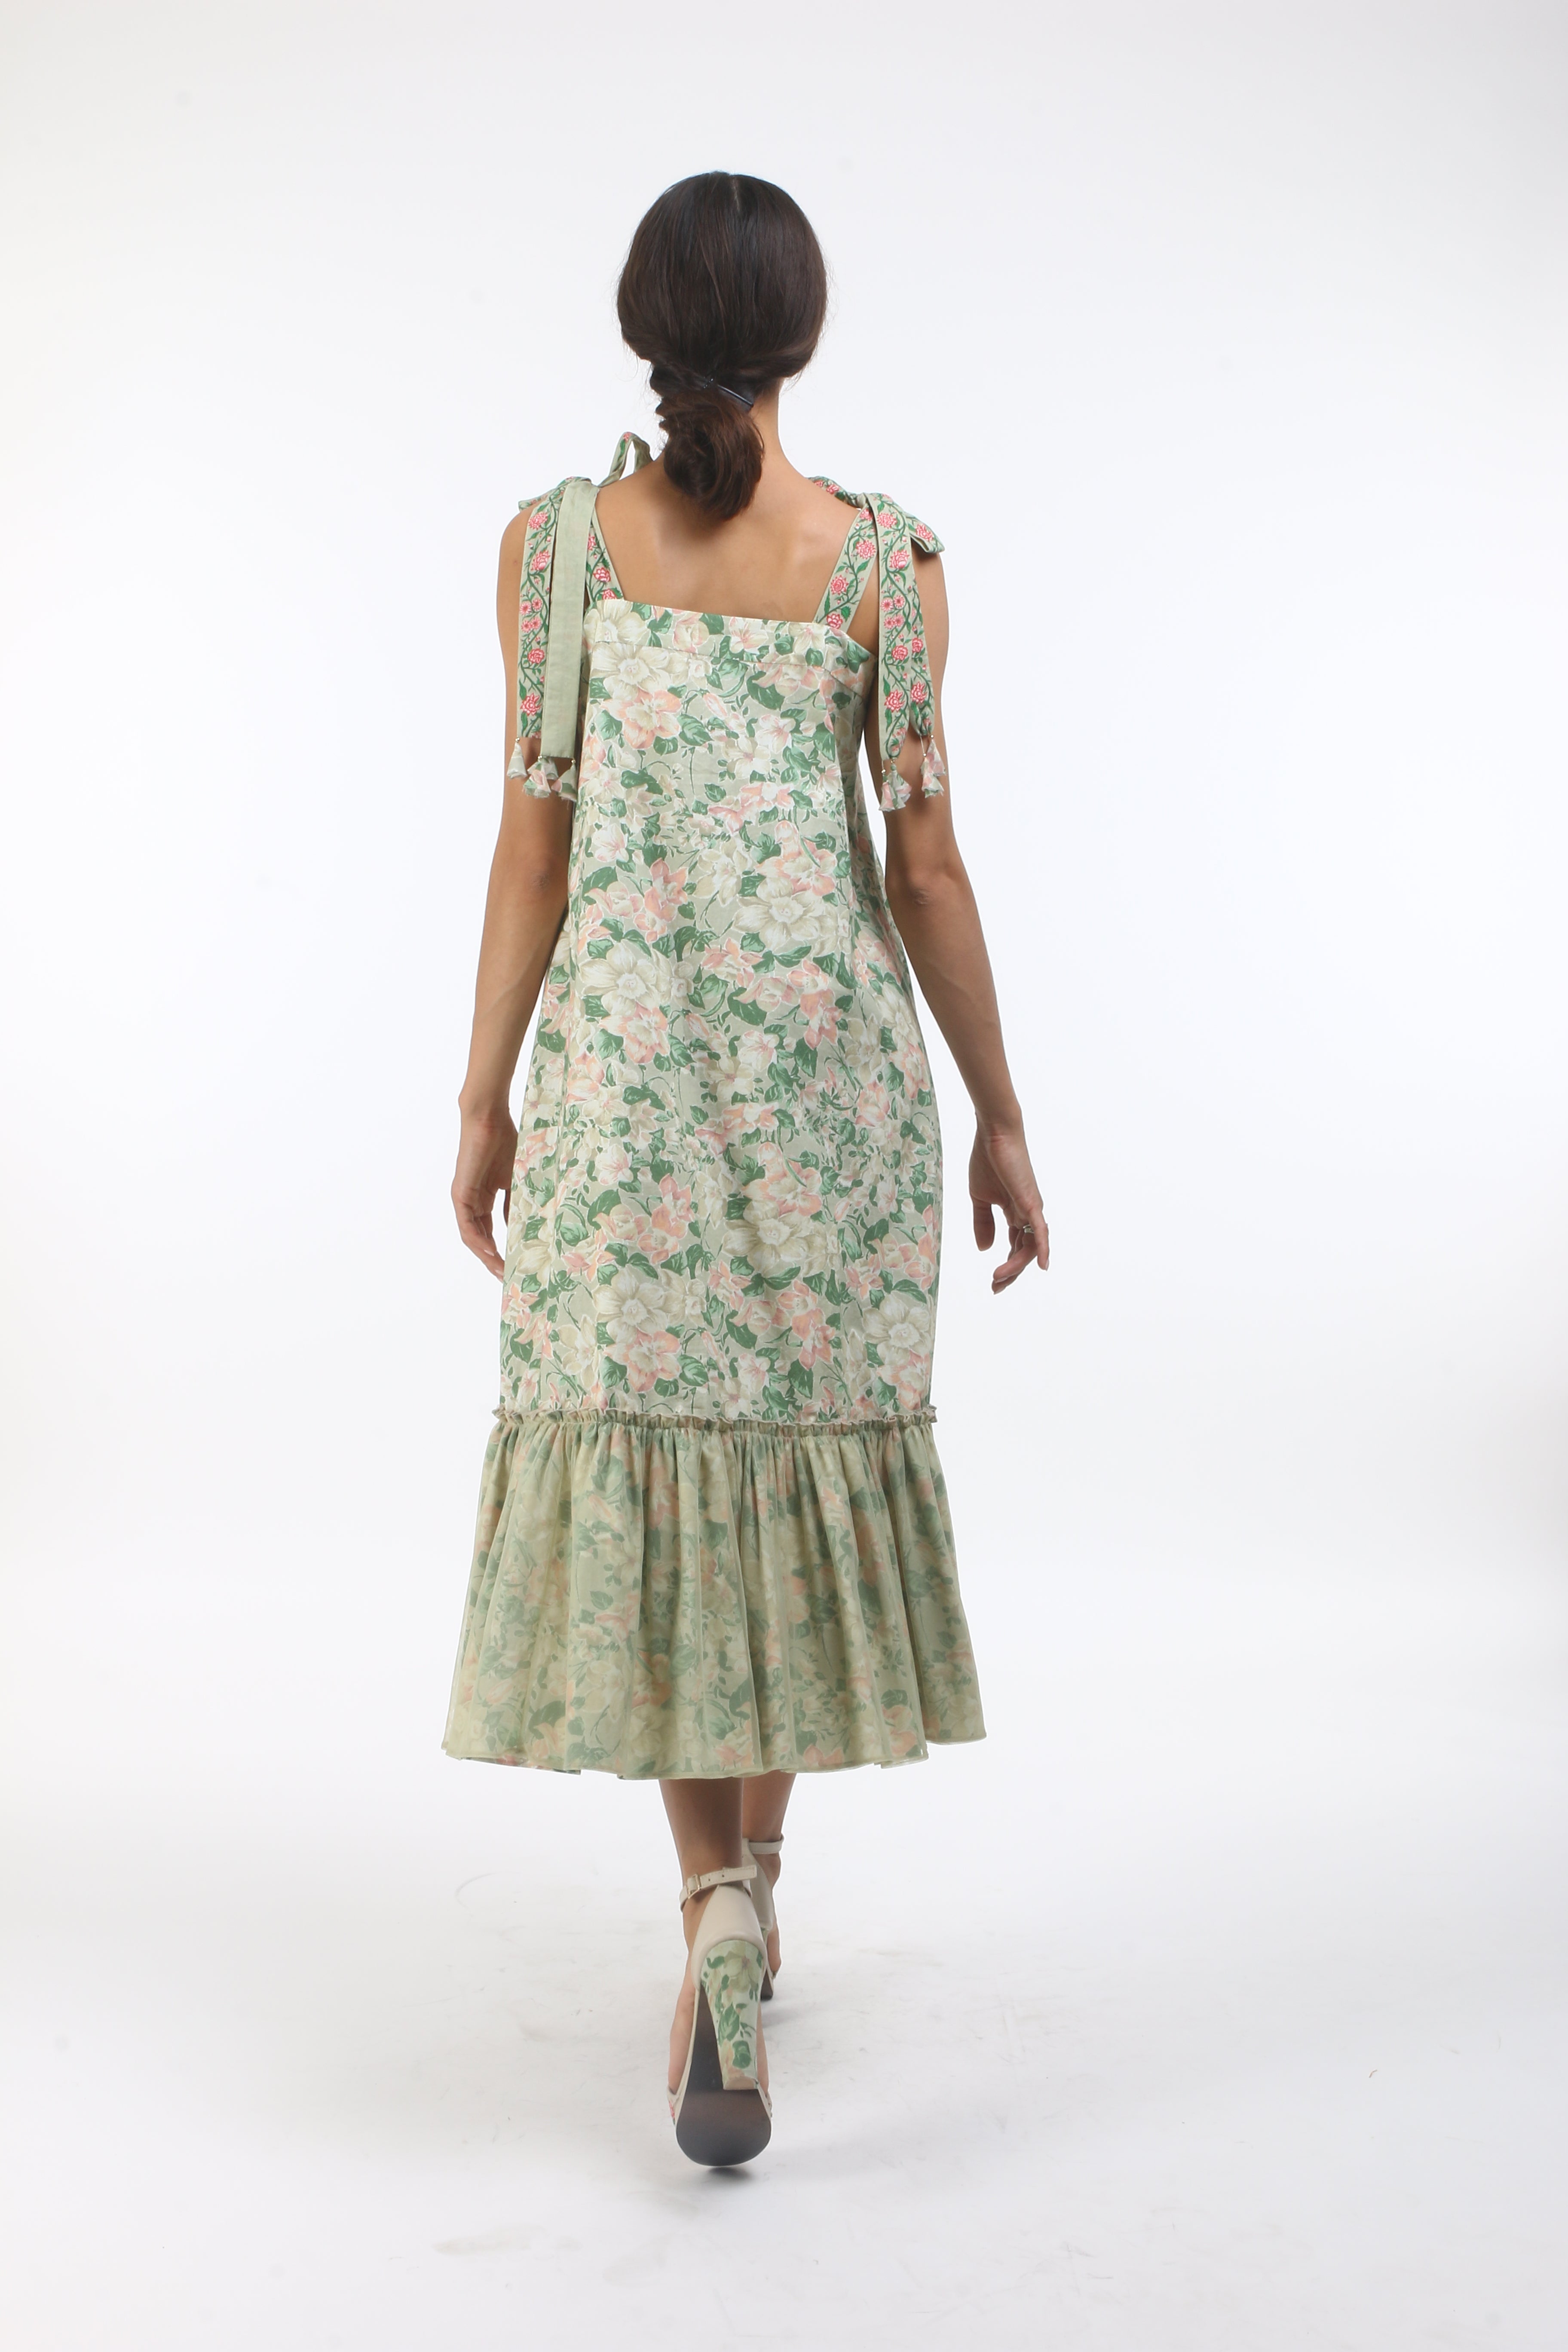 Bloom antique jade bibi jaal printed tie up dress with bloom tassels and tulle gathers.